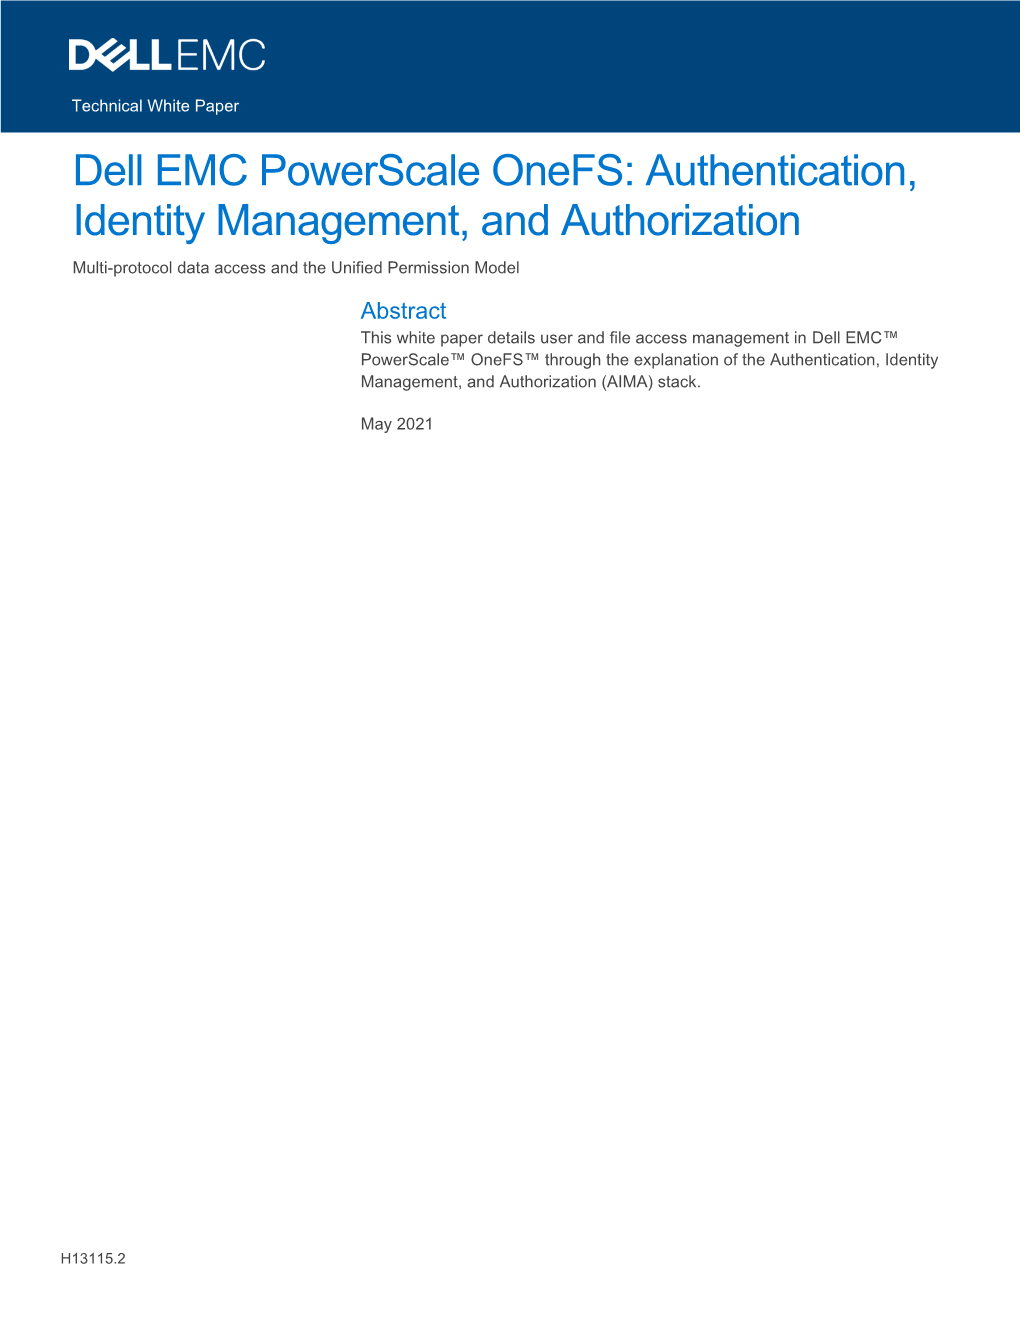 Dell EMC Powerscale Onefs: Authentication, Identity Management, and Authorization Multi-Protocol Data Access and the Unified Permission Model